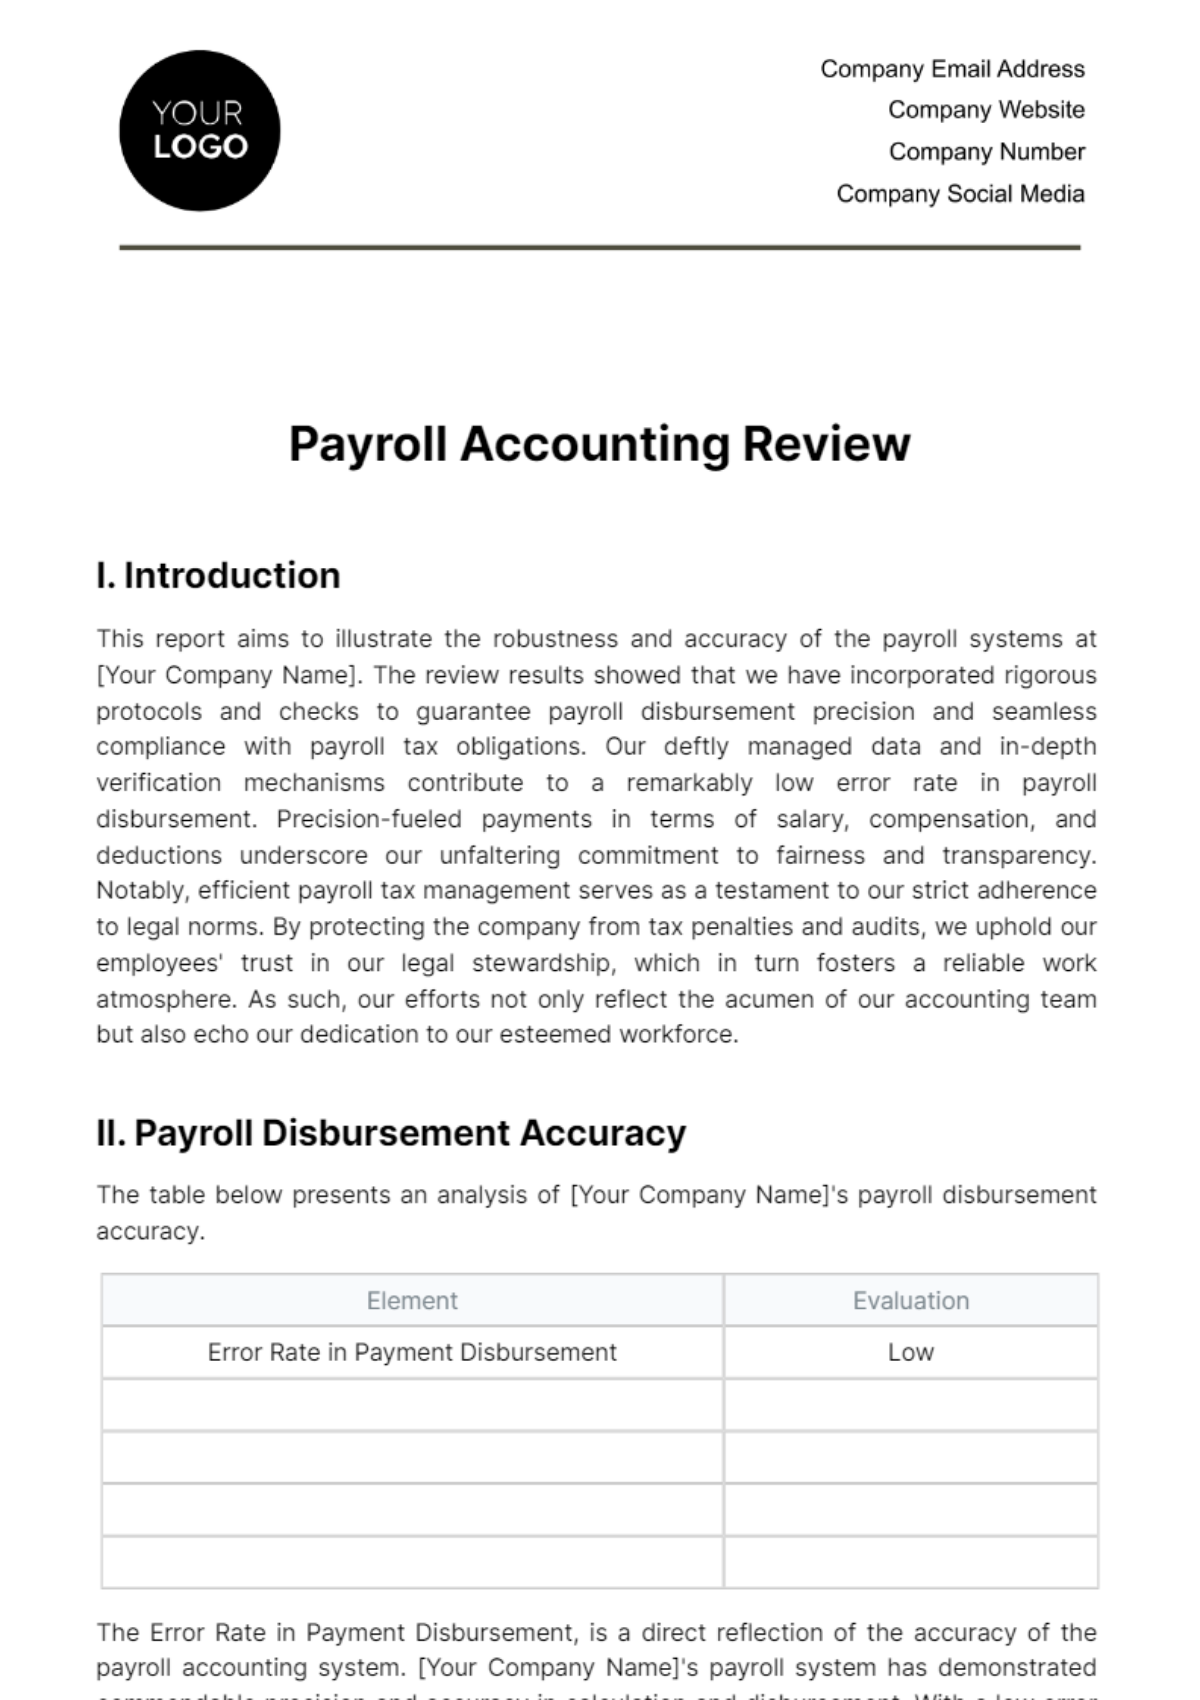 Payroll Accounting Review Template